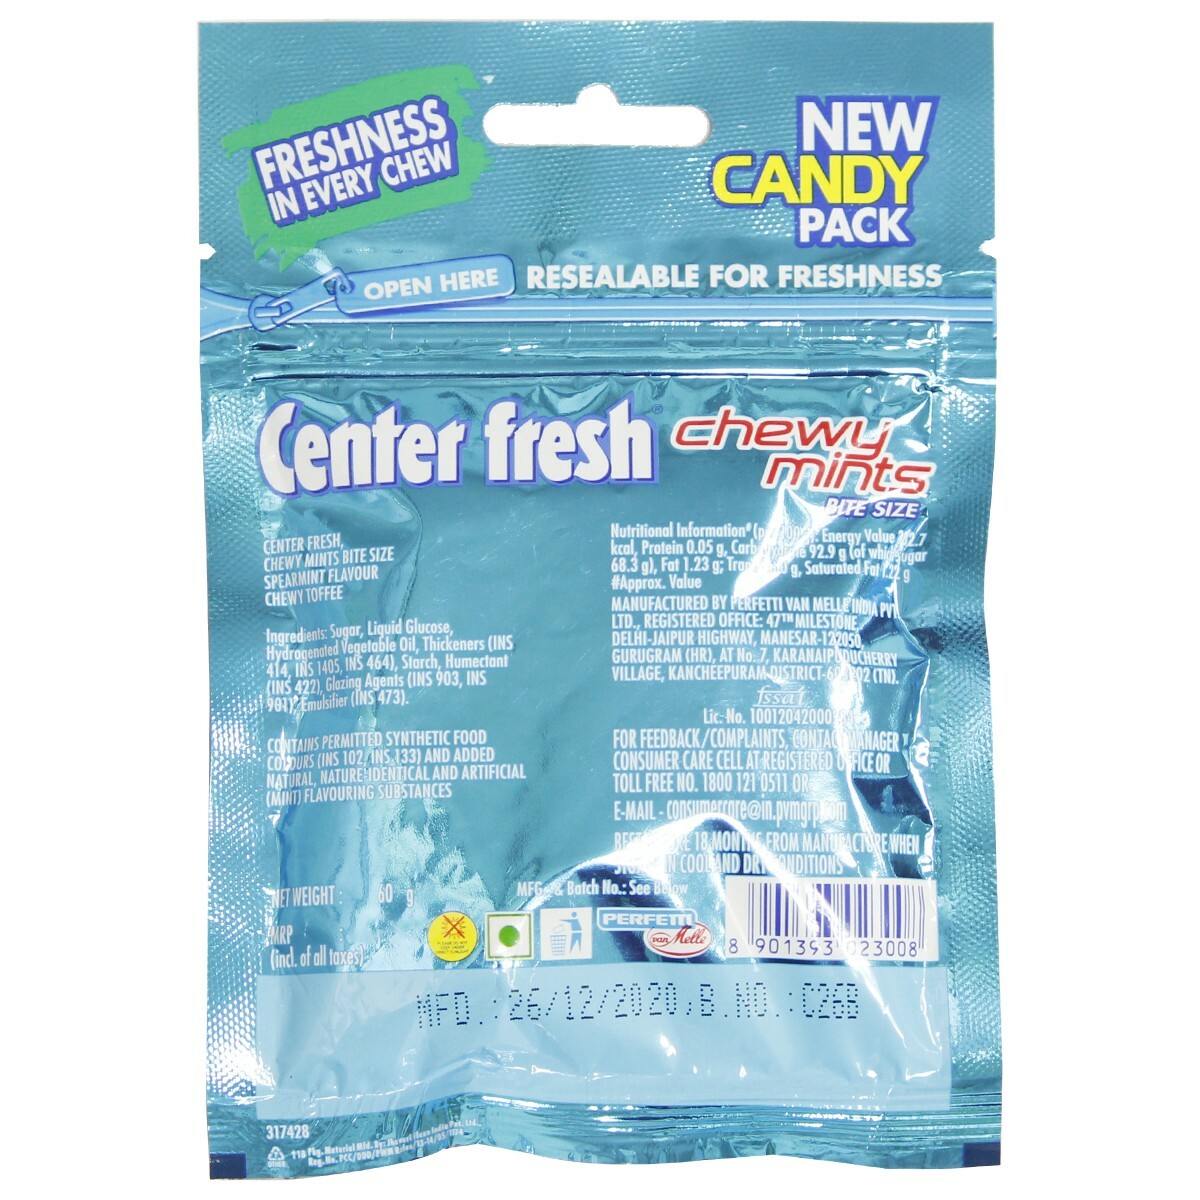 CENTER FRESH Chewy Mints Pouch 60g